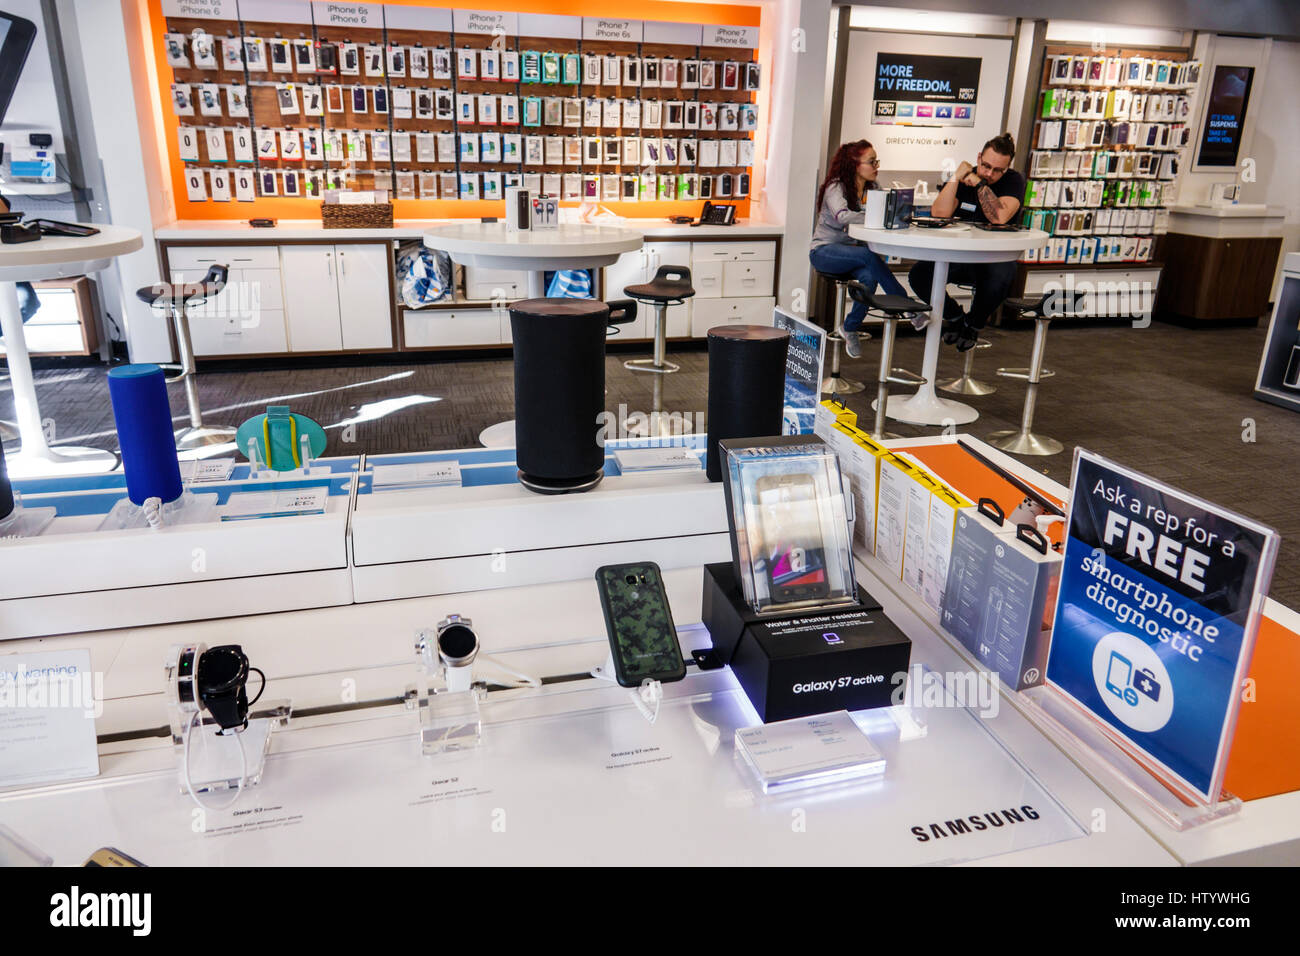 Miami Beach Florida,AT&T Store,store,wireless services,inside interior,smartphone cell phone phones texting,Samsung,tablet,watch,display sale showroom Stock Photo